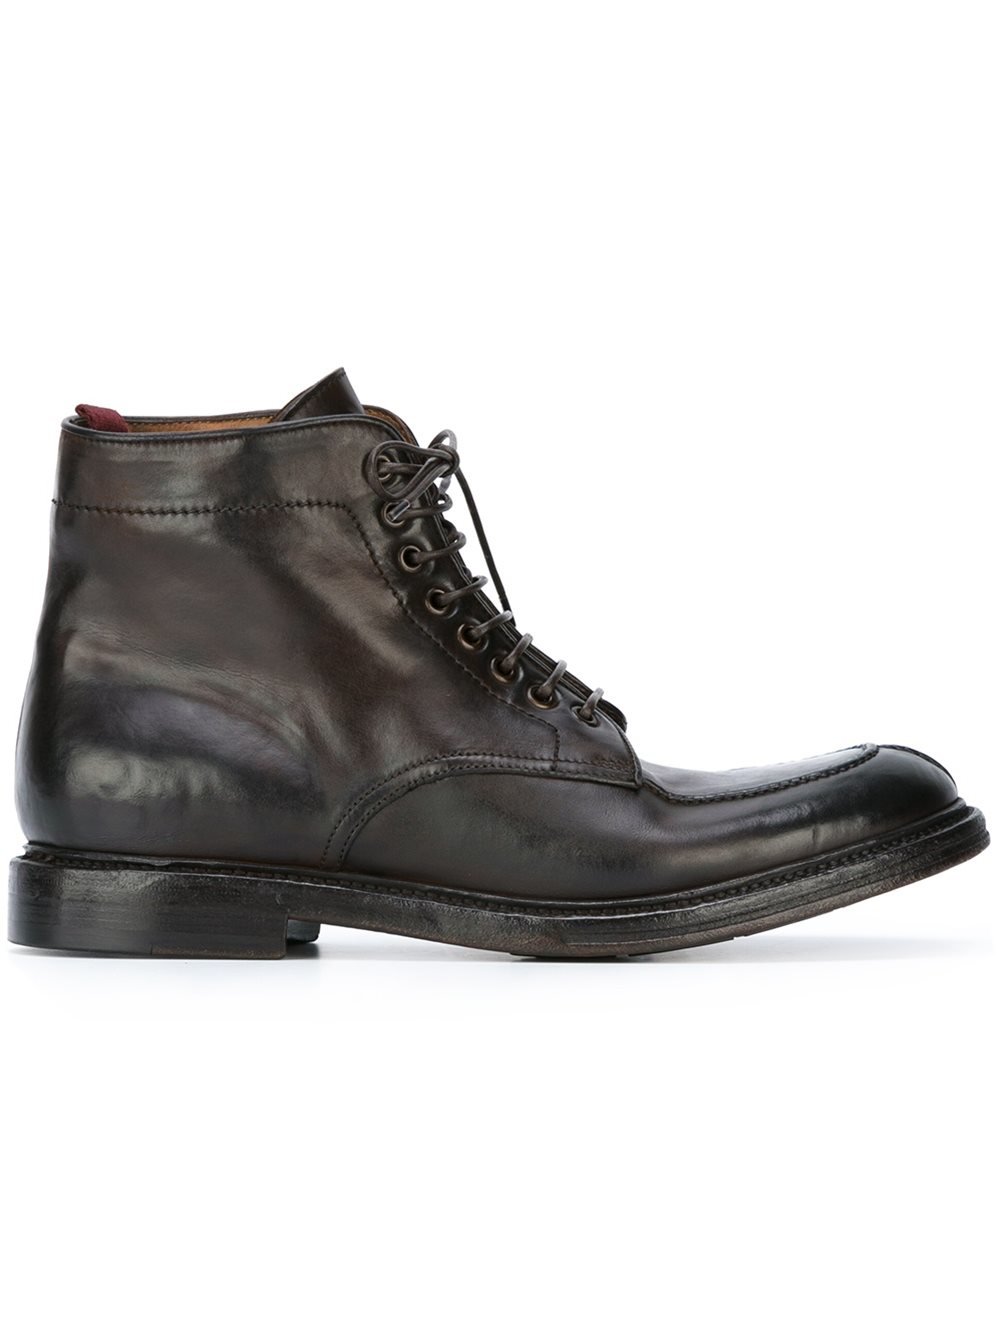 Lyst - Silvano Sassetti Lace-up Boots in Brown for Men